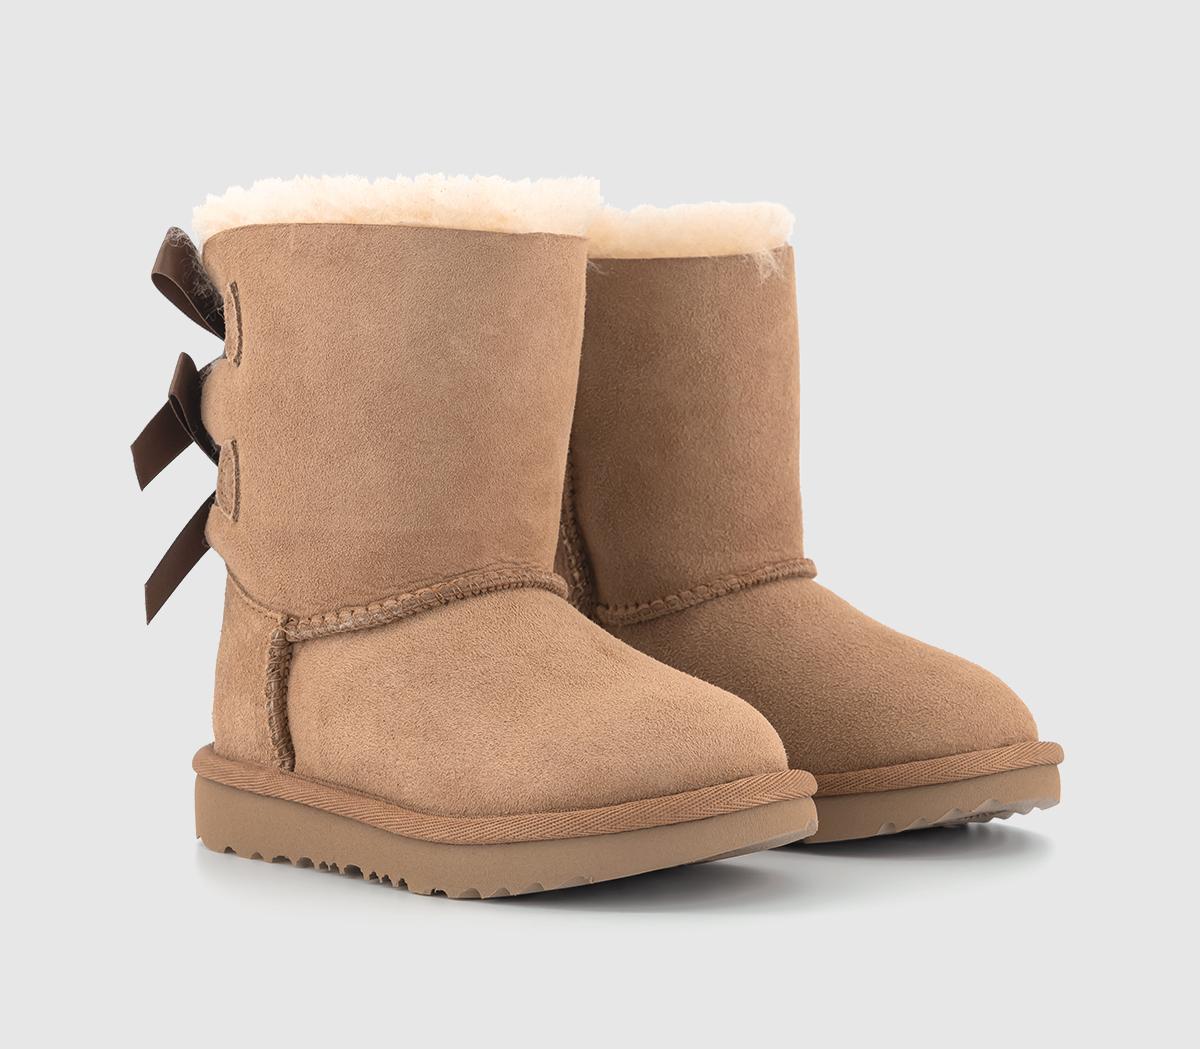 UGG Kids Toddler Bailey Bow Ii Boots Chestnut Tan, 8infant